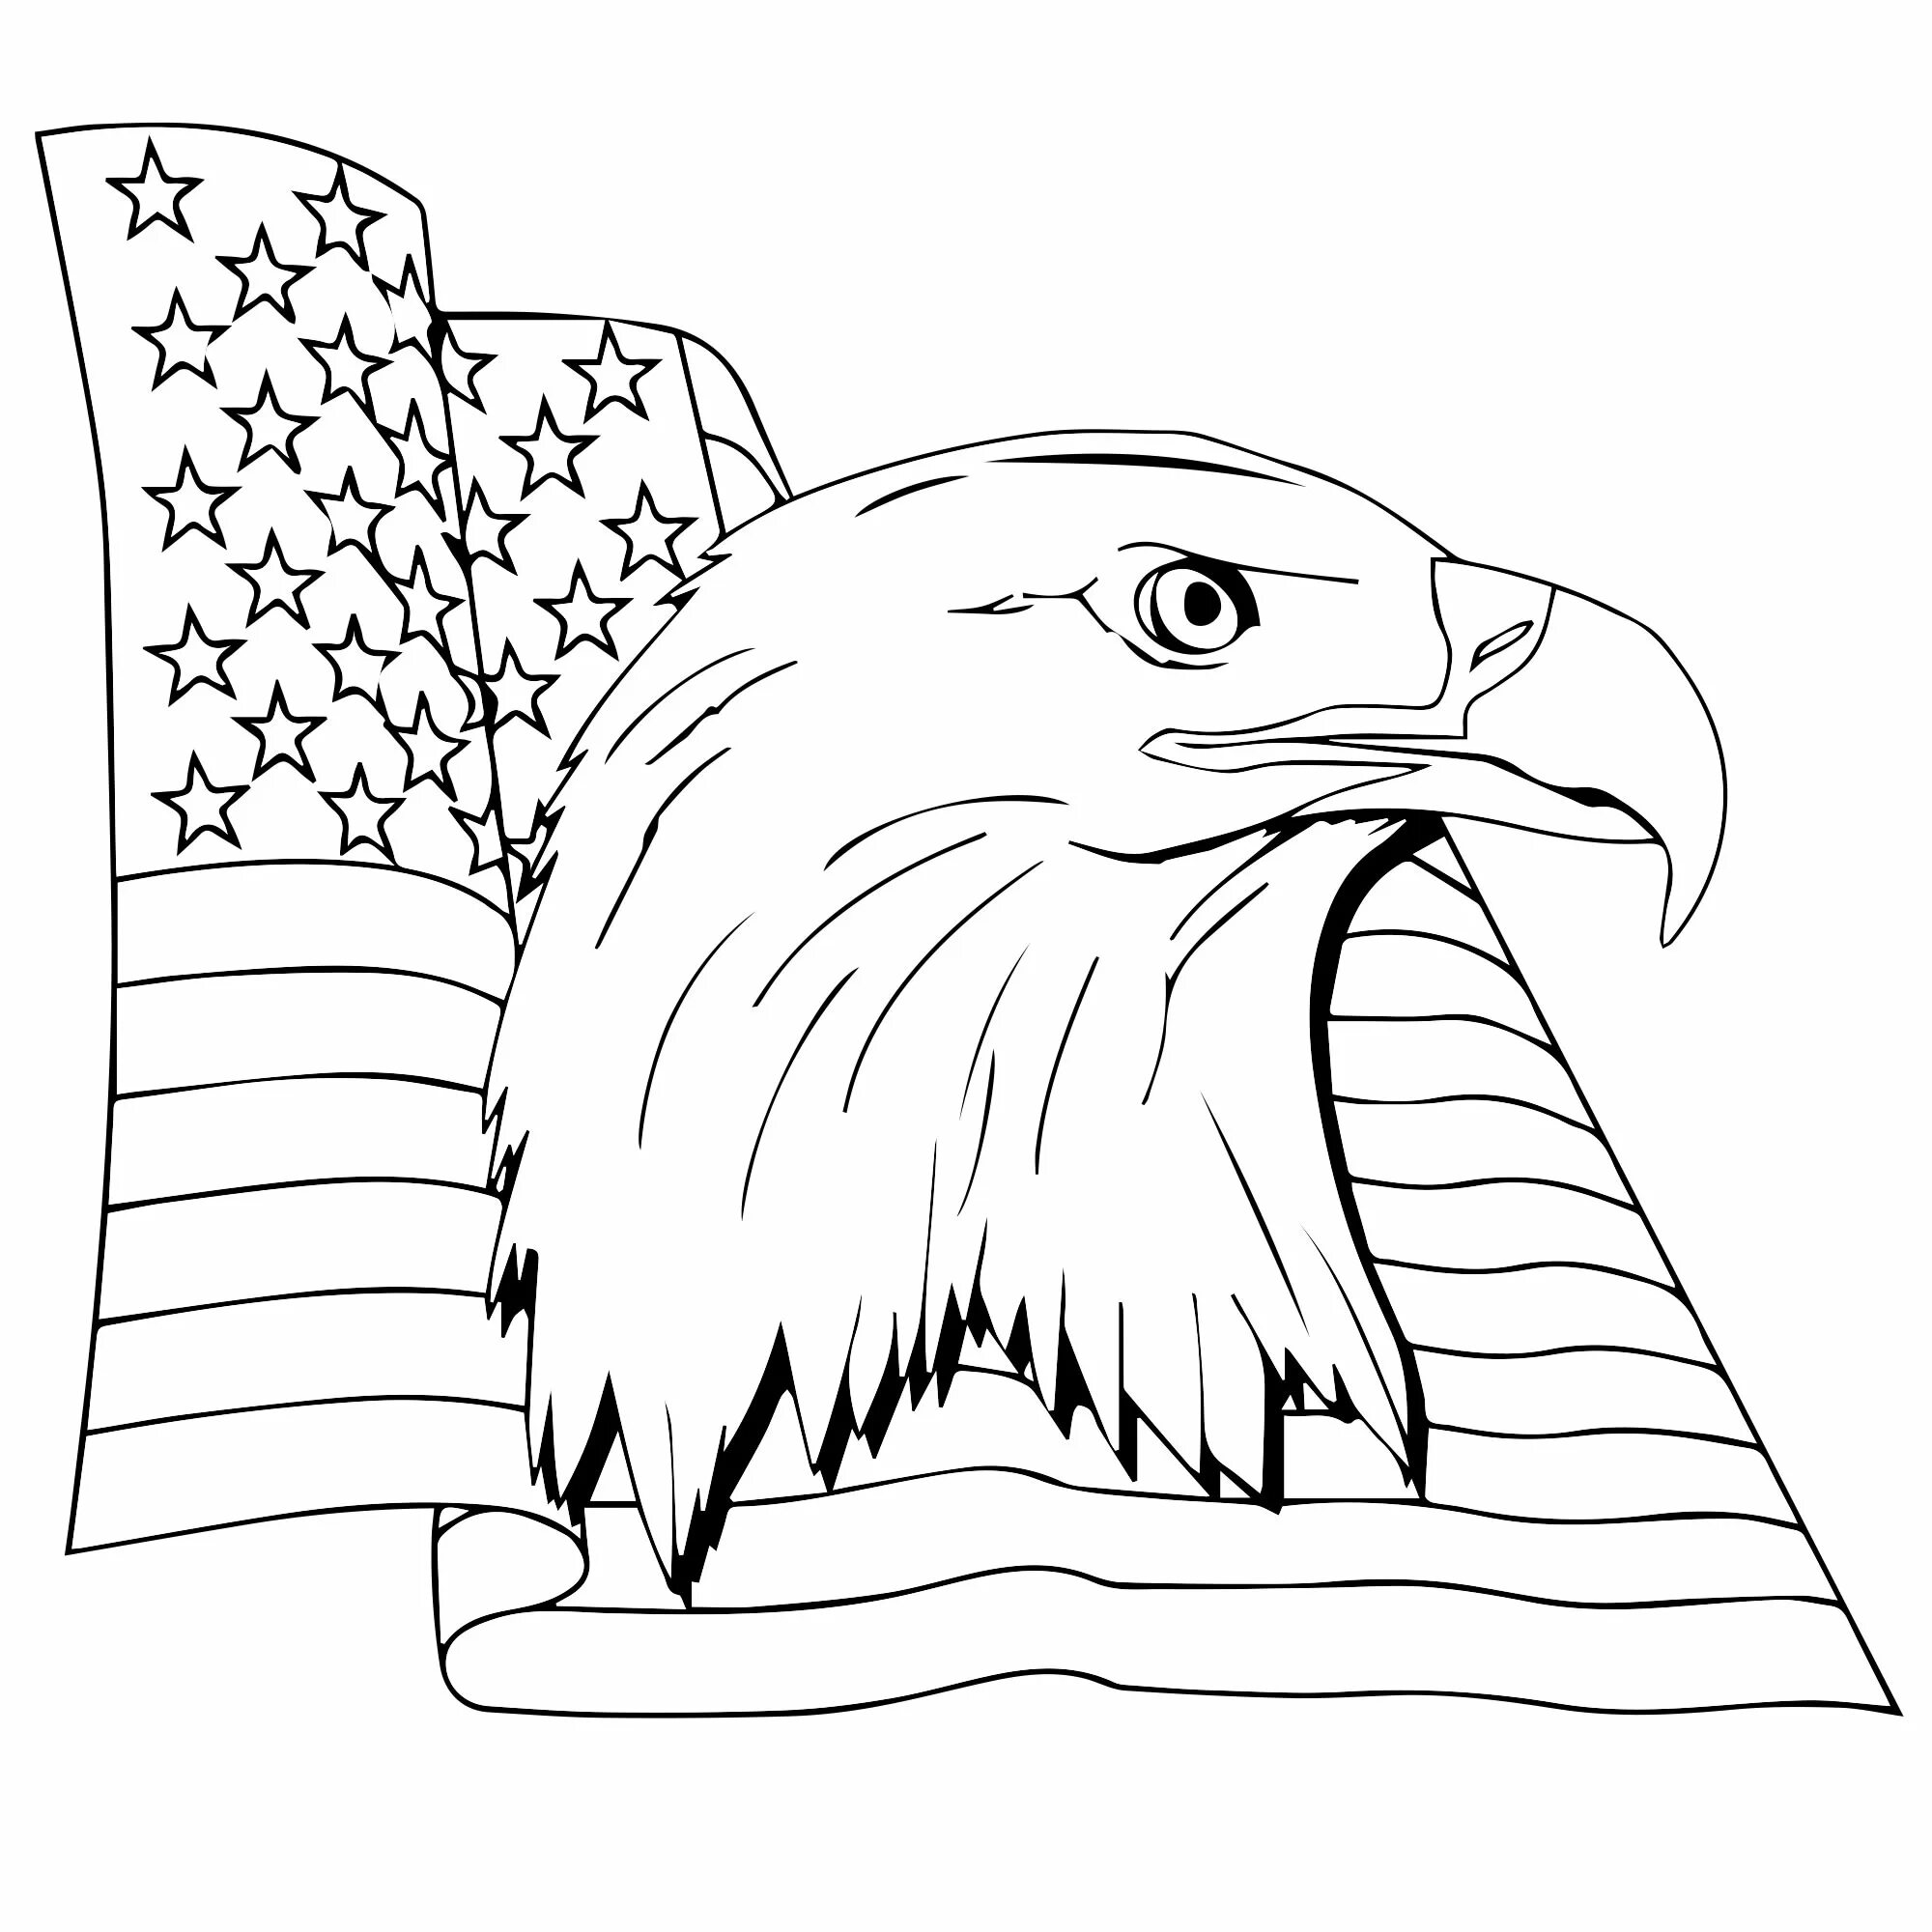 Coat of arms of the city of eagle #4